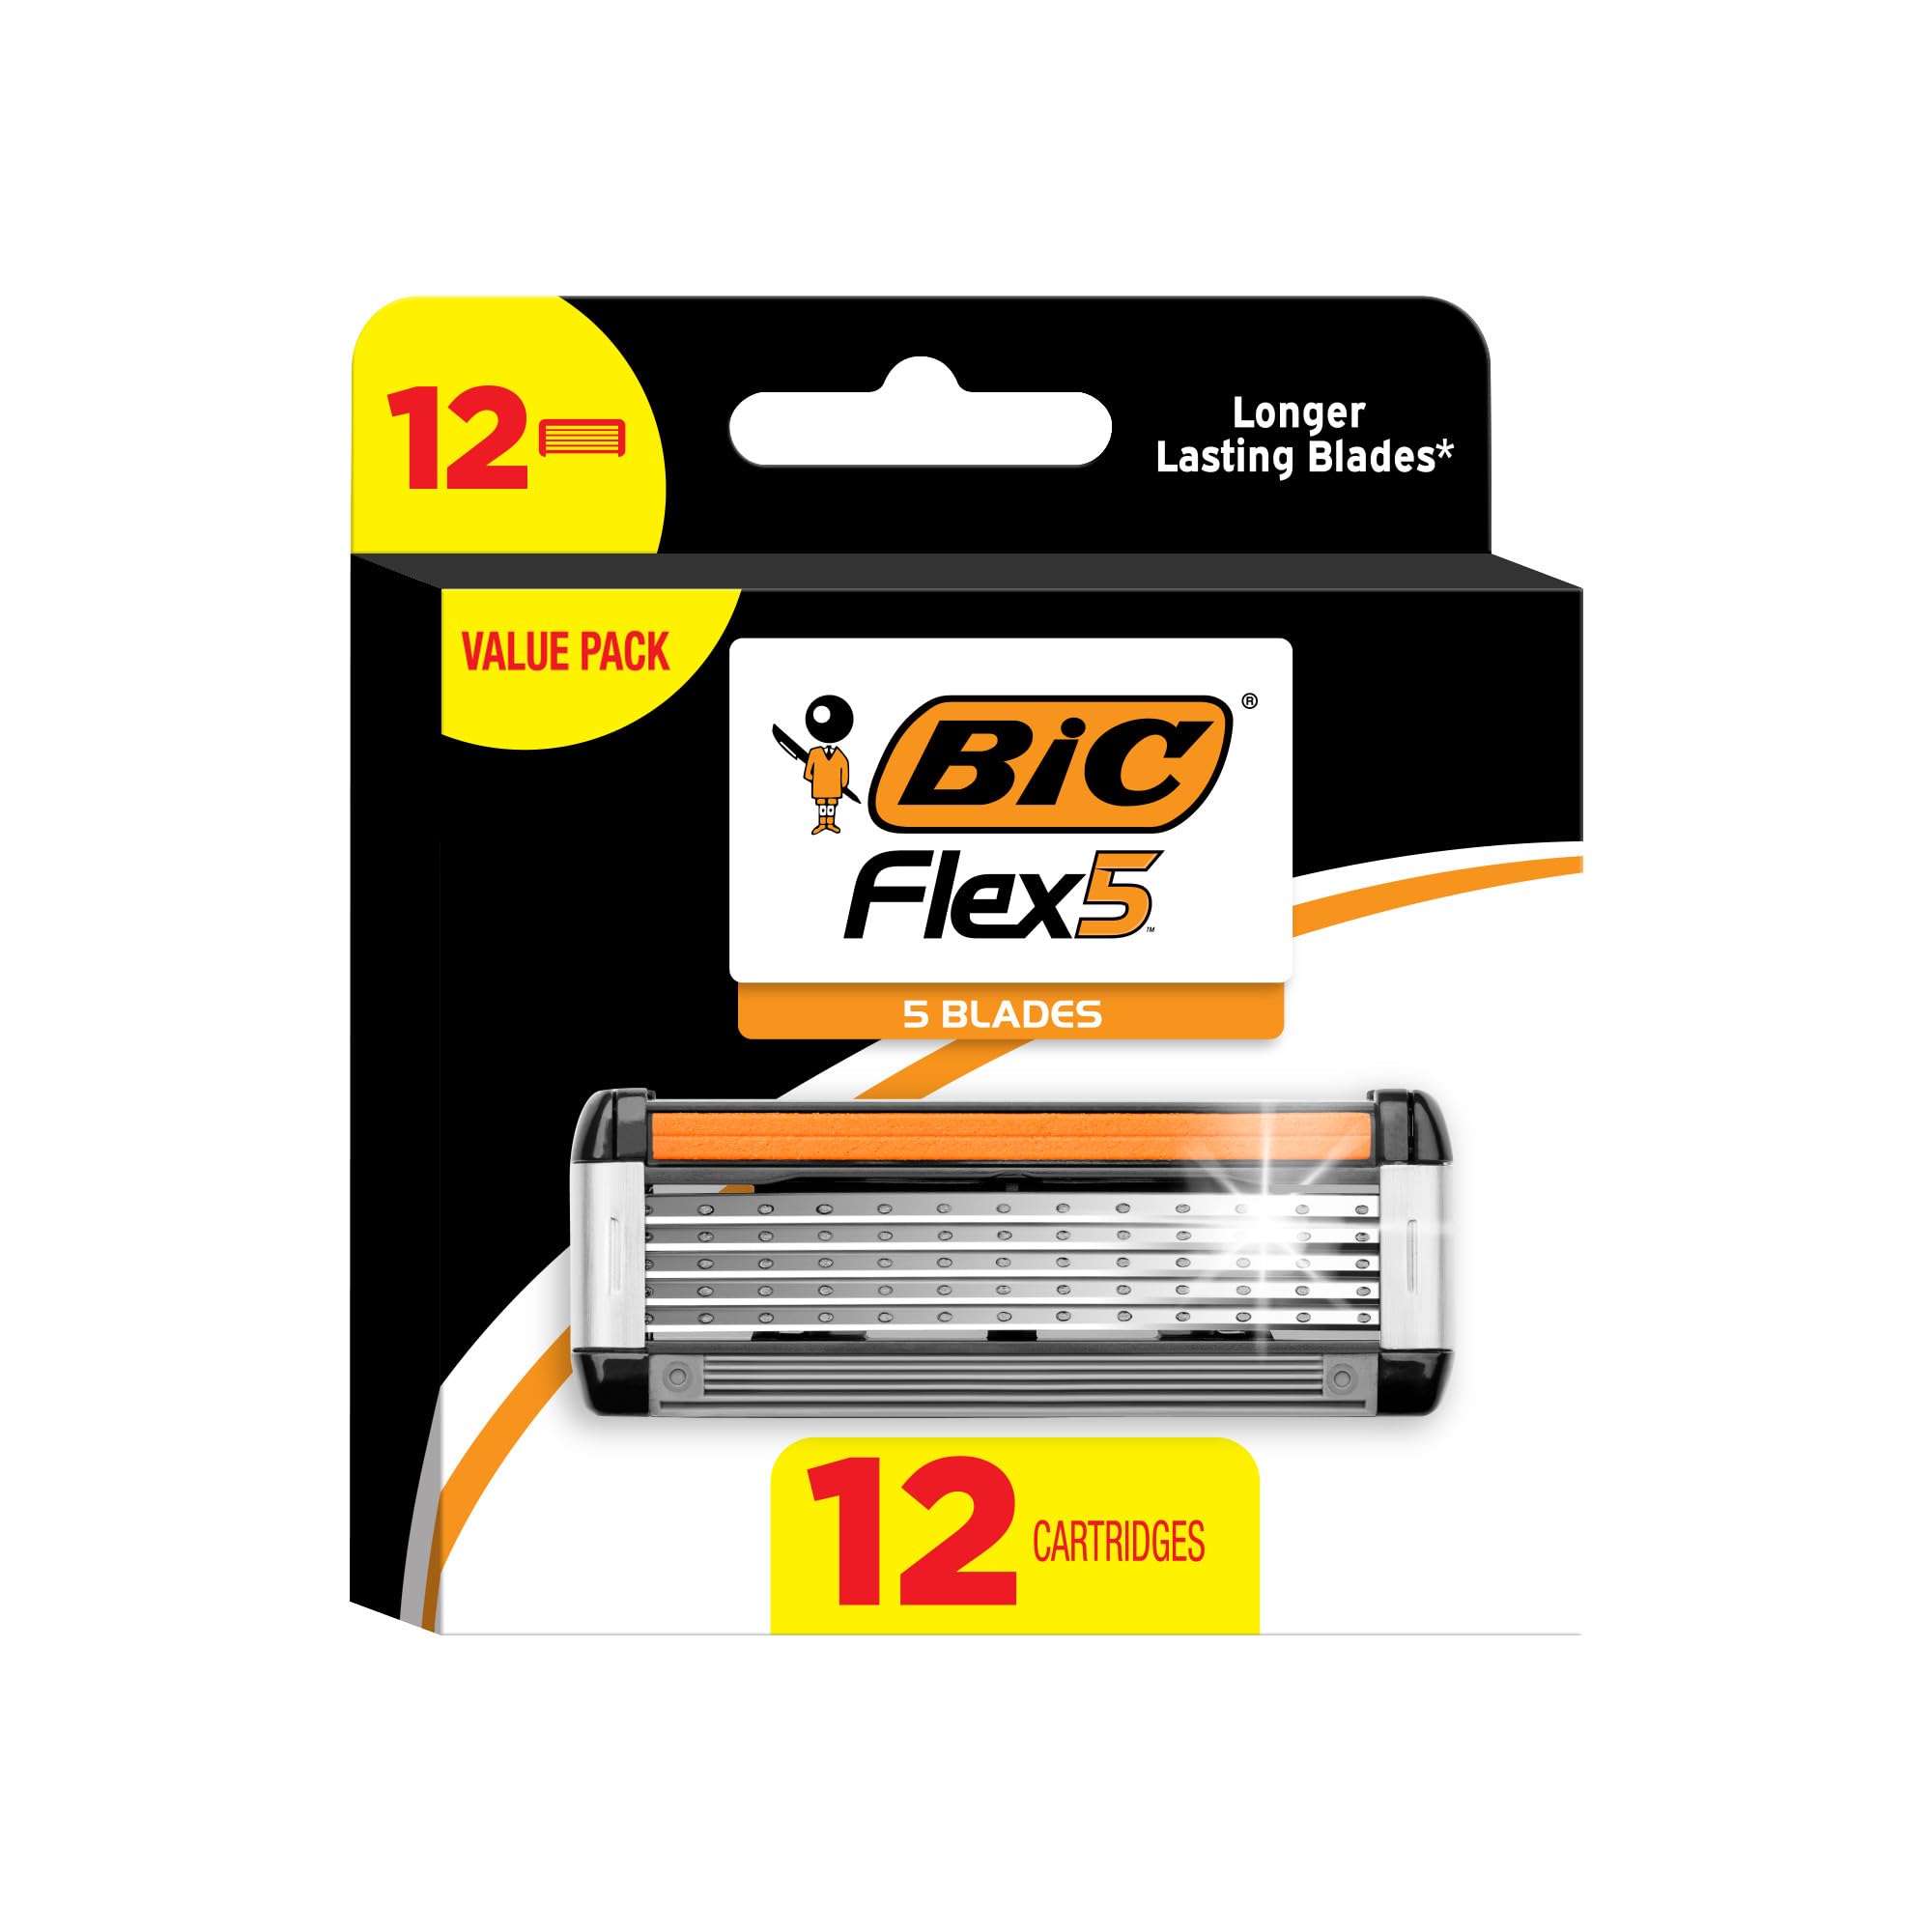 BIC Flex 5 Refillable Refill Razor Cartridges for Men, Long-Blade Razors for a Smooth and Comfortable Shave, 12 Refill Cartridges